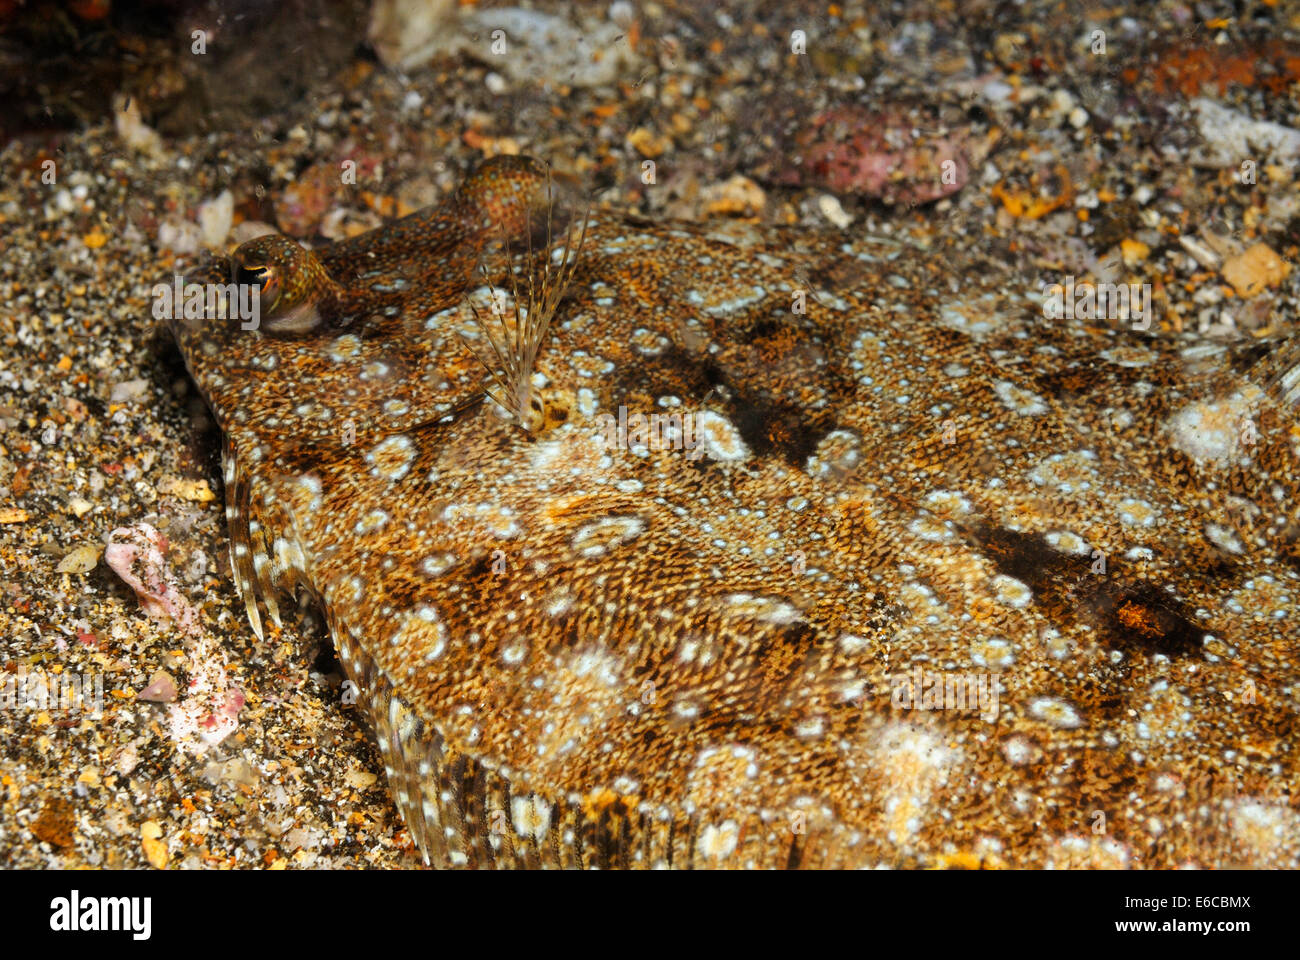 Pacific Leopard Flounder (Bothus leopardinus) on sand by night time, Galapagos Islands, Ecuador, South America Stock Photo